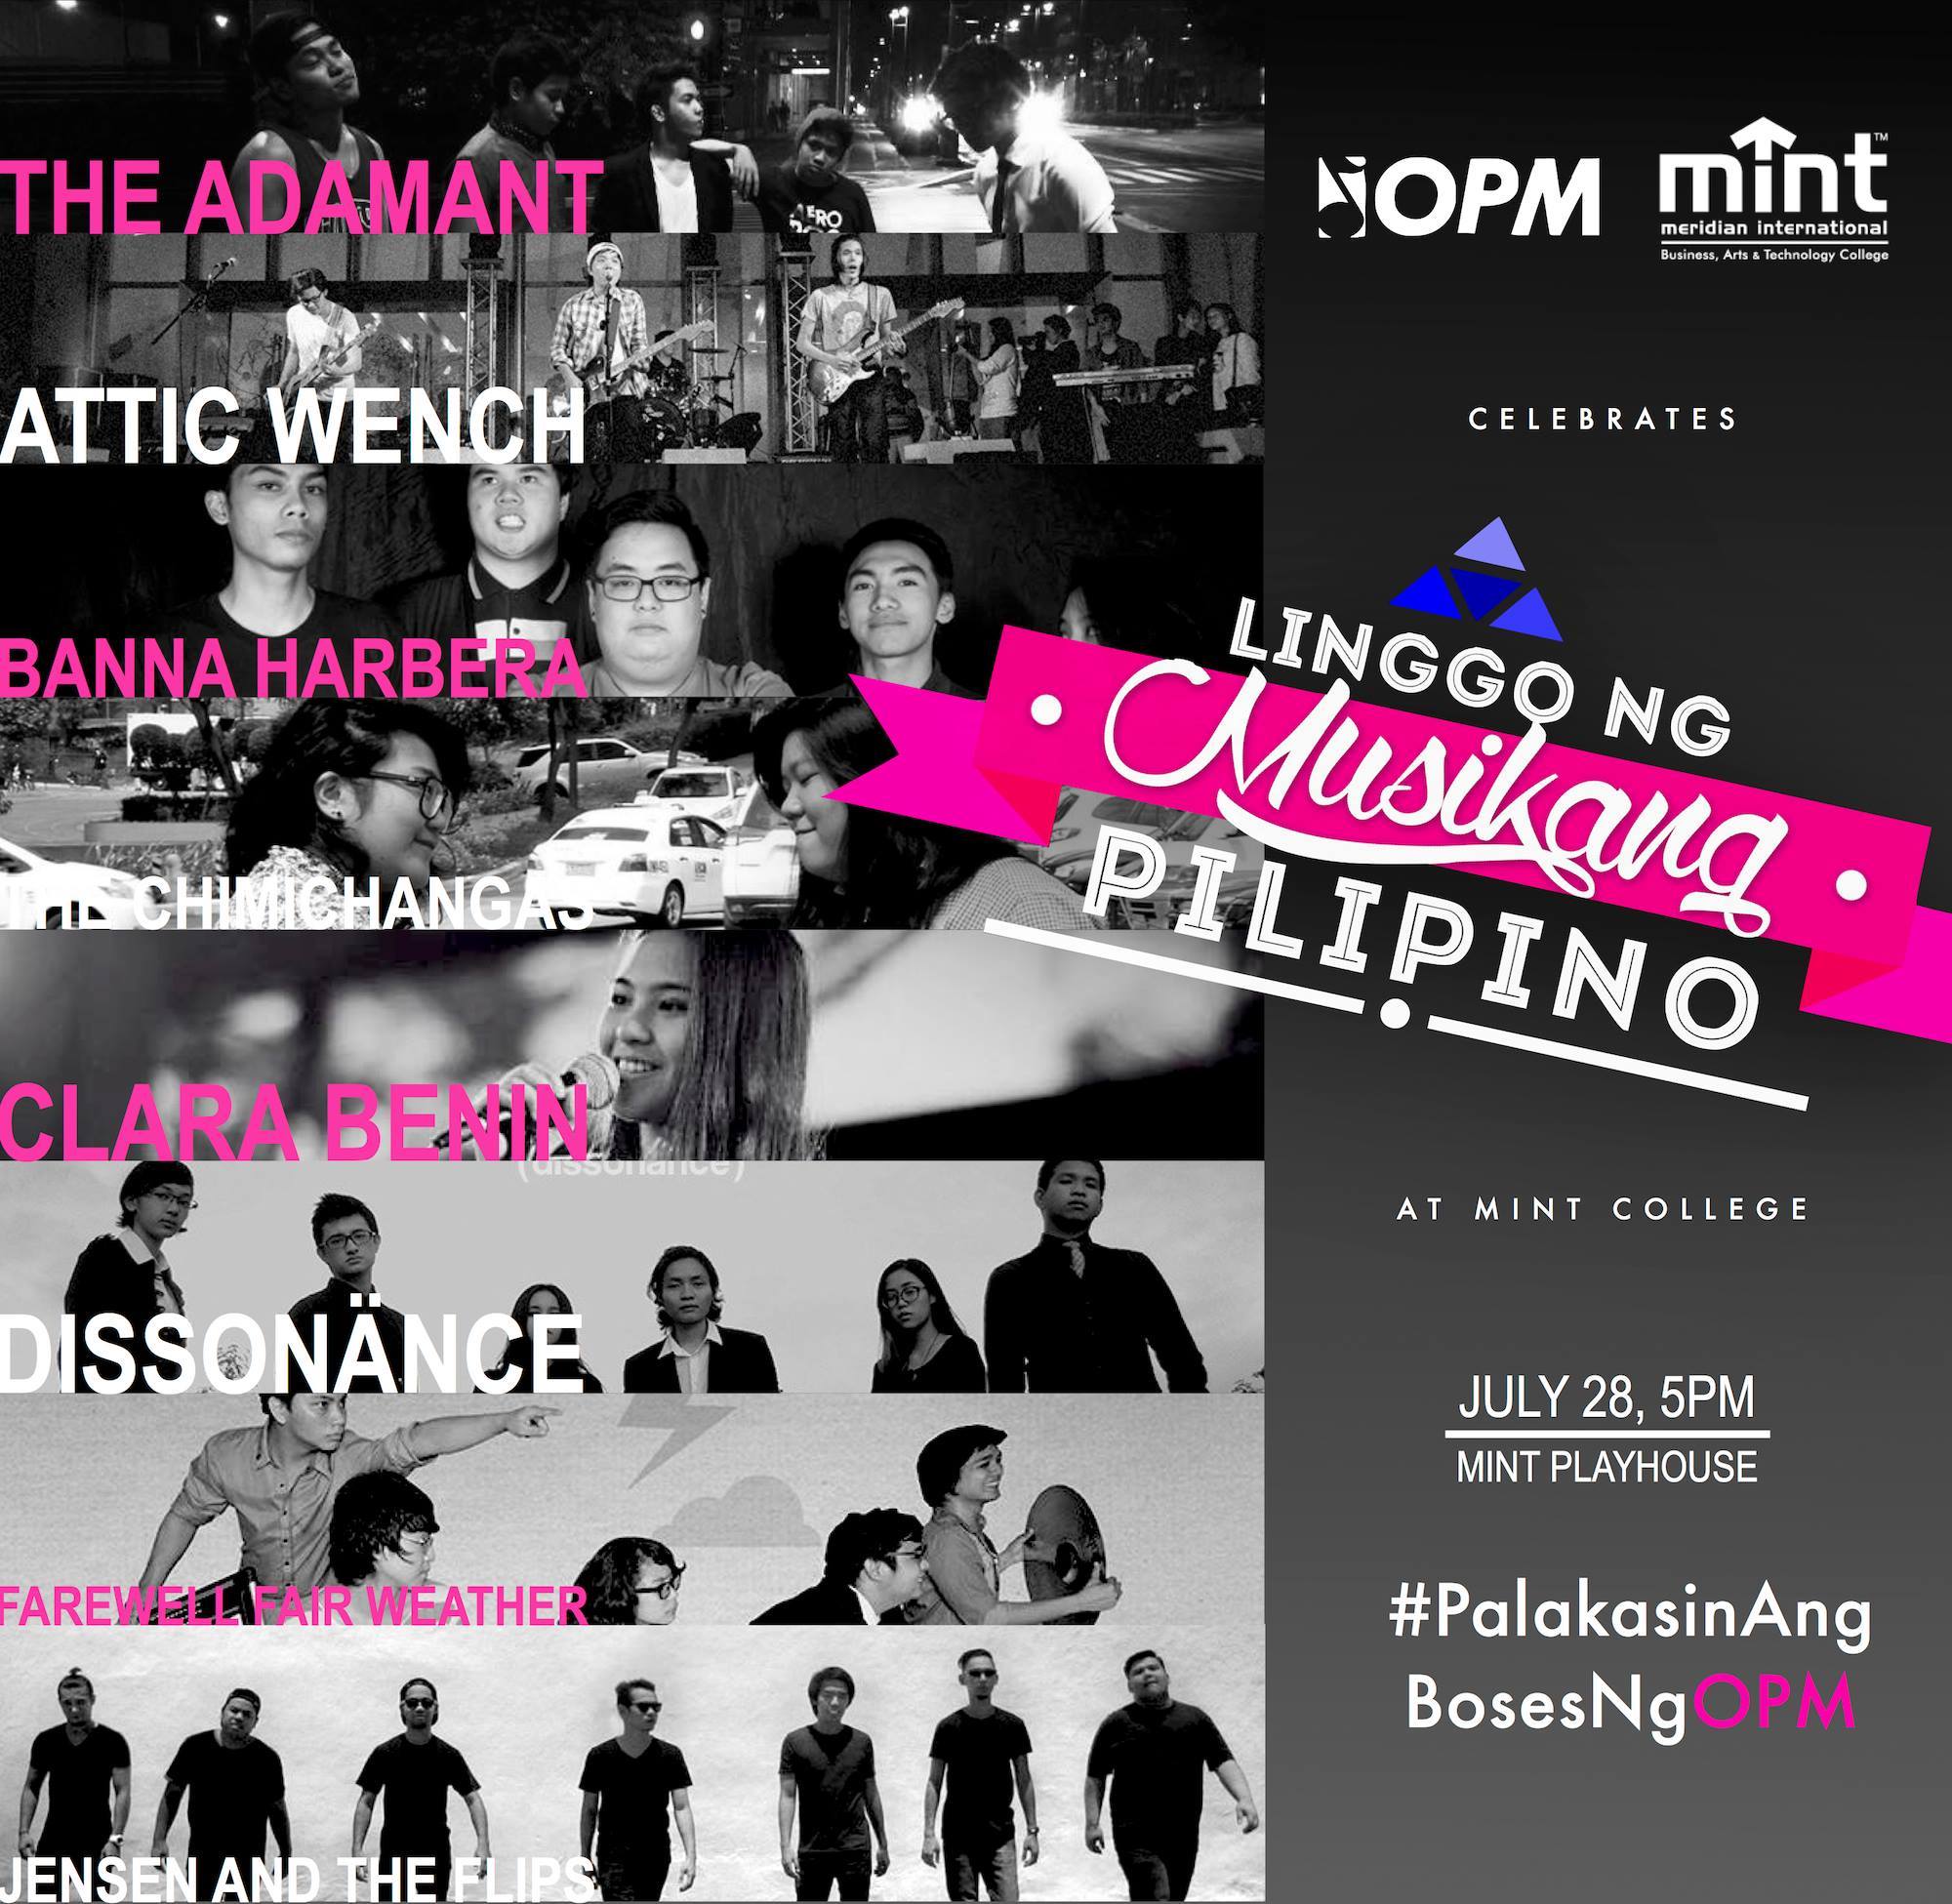 Mony Romana This is getting to be a great habit: seeing bands composed of our students from CSB and MINT on one bill. Catch the future sounds of OPM, college based bands, celebrating Linggo ng Musikang Pilipino at MINT College. Check them out! Register here : https://www.eventbrite.com/e/the-future-sounds-of-opm-tickets-17846519420